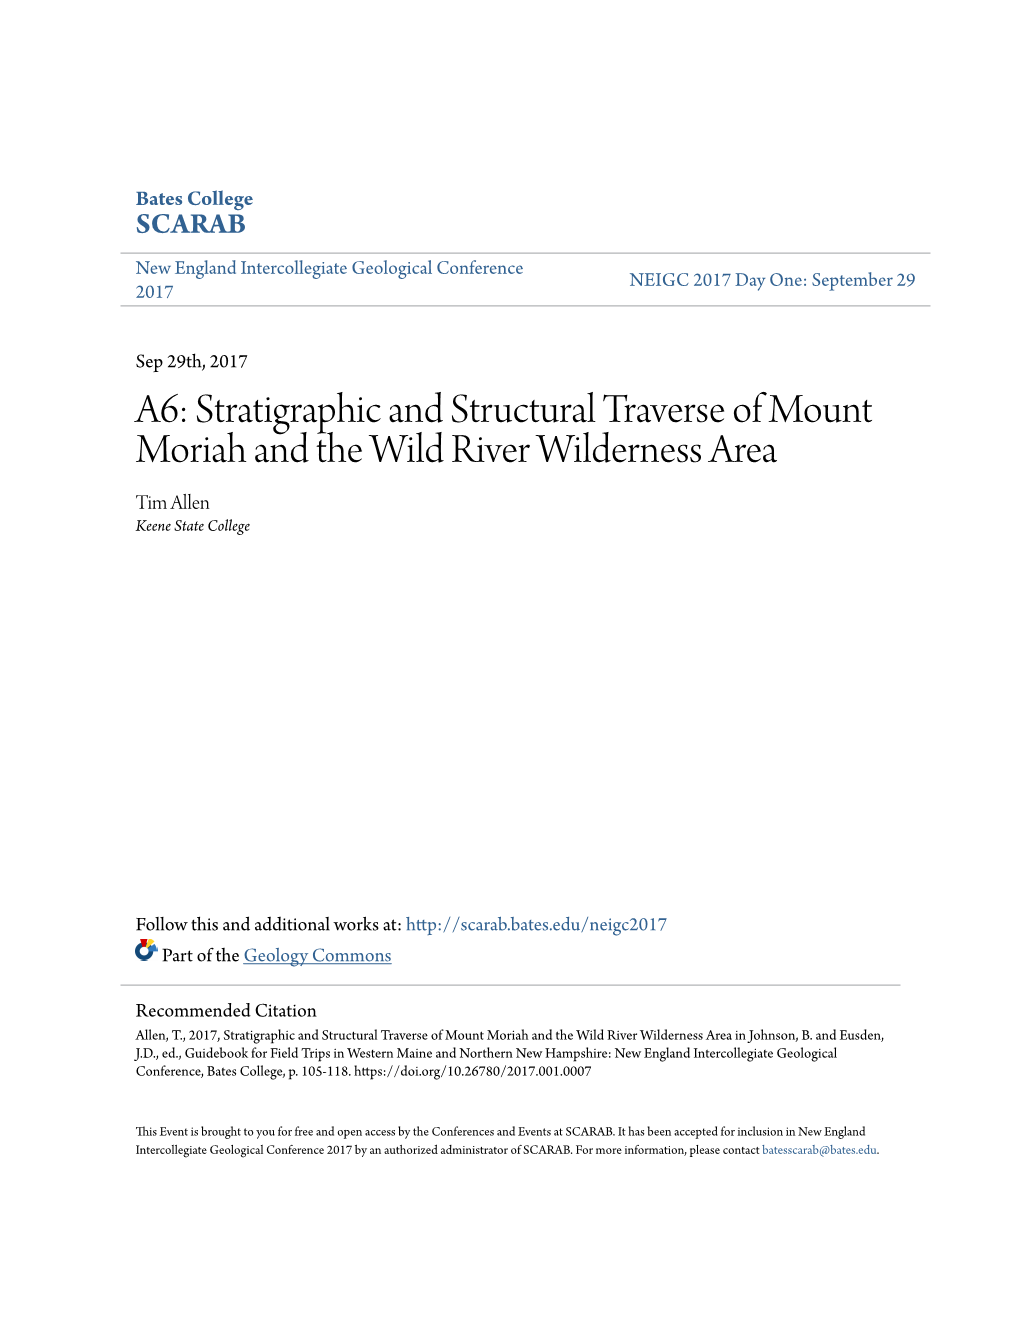 Stratigraphic and Structural Traverse of Mount Moriah and the Wild River Wilderness Area Tim Allen Keene State College